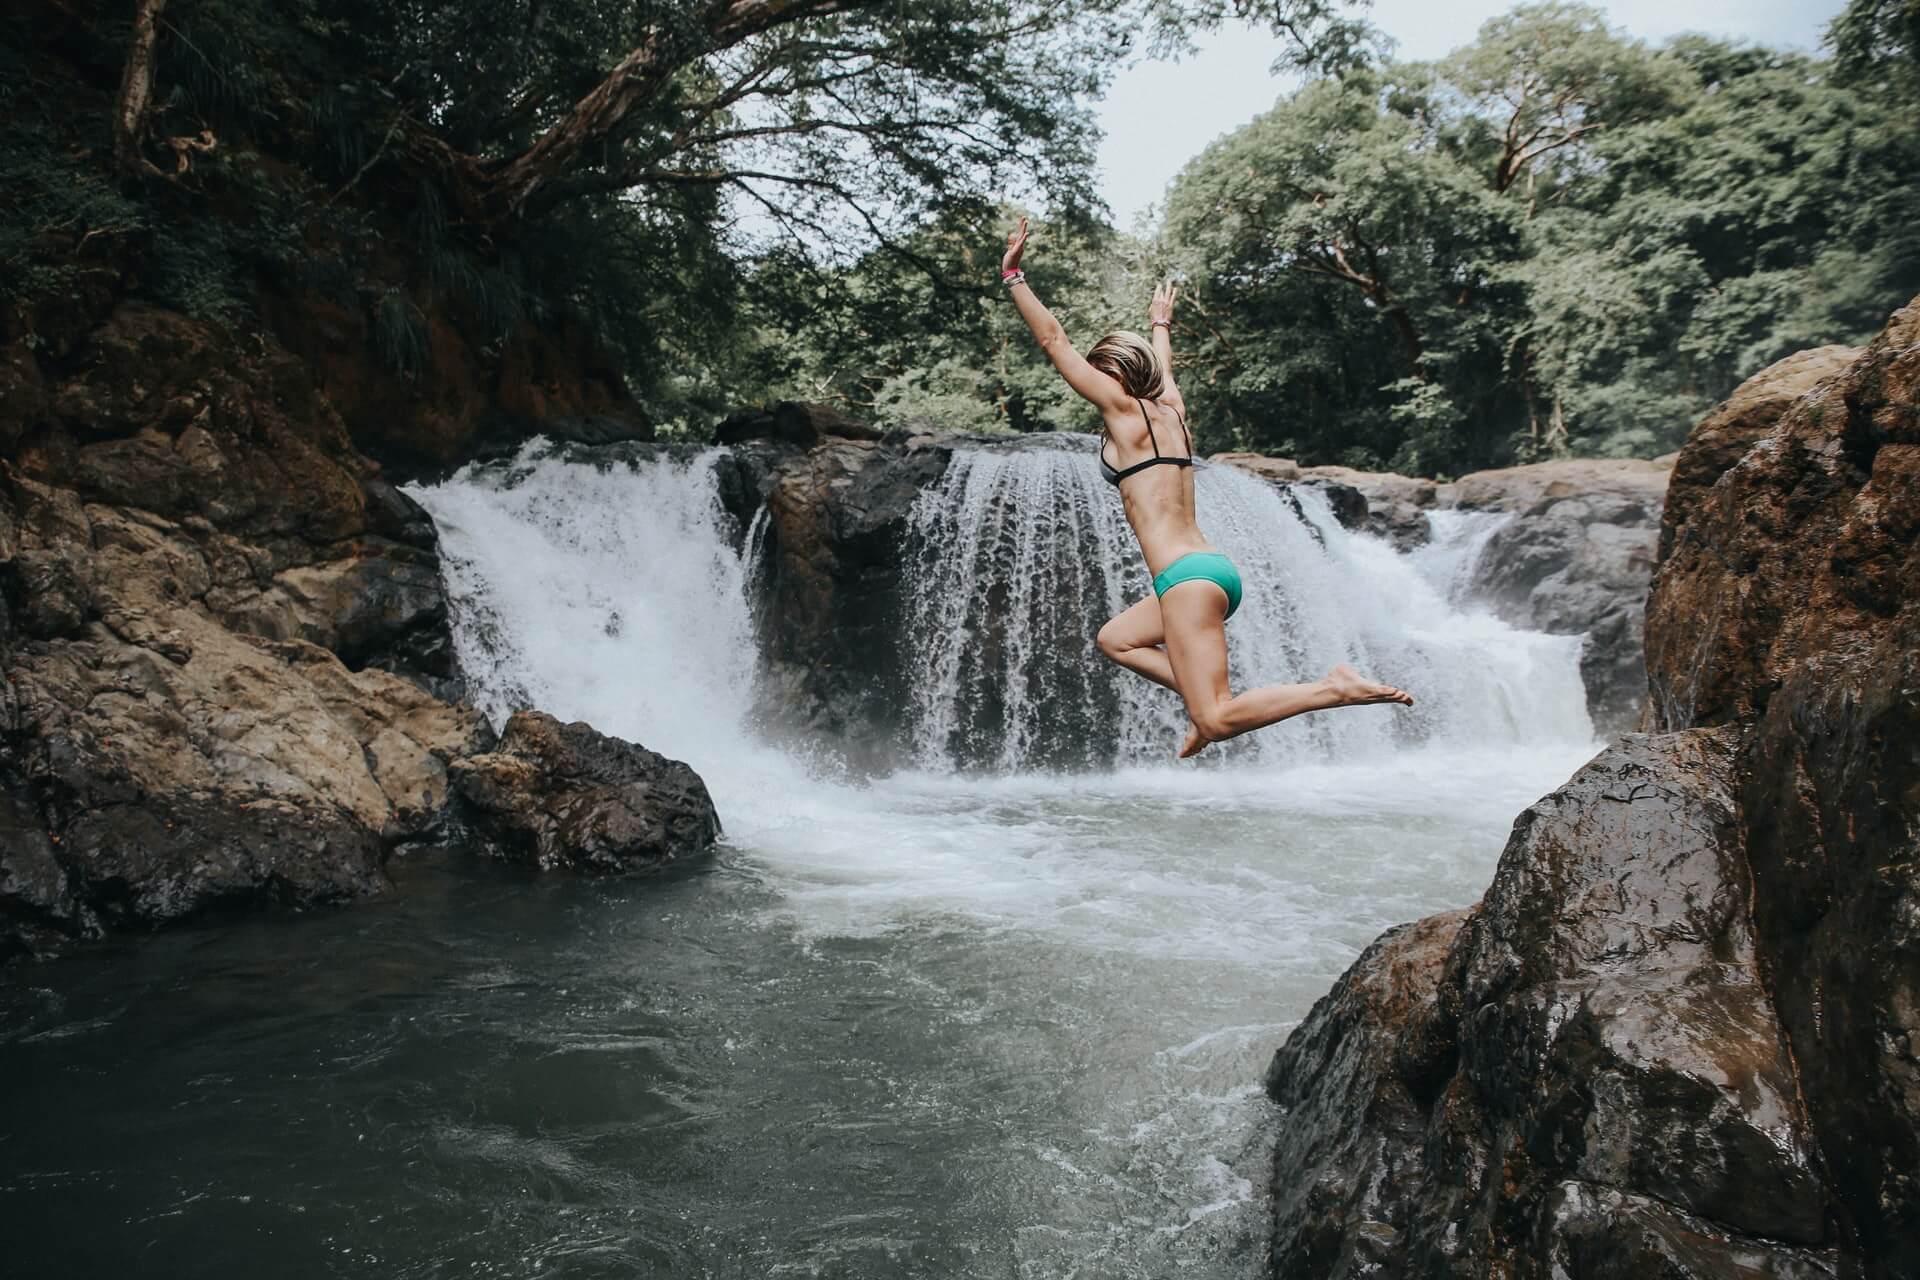 THE 10 BEST Yoga Retreats in Costa Rica for 2024 •